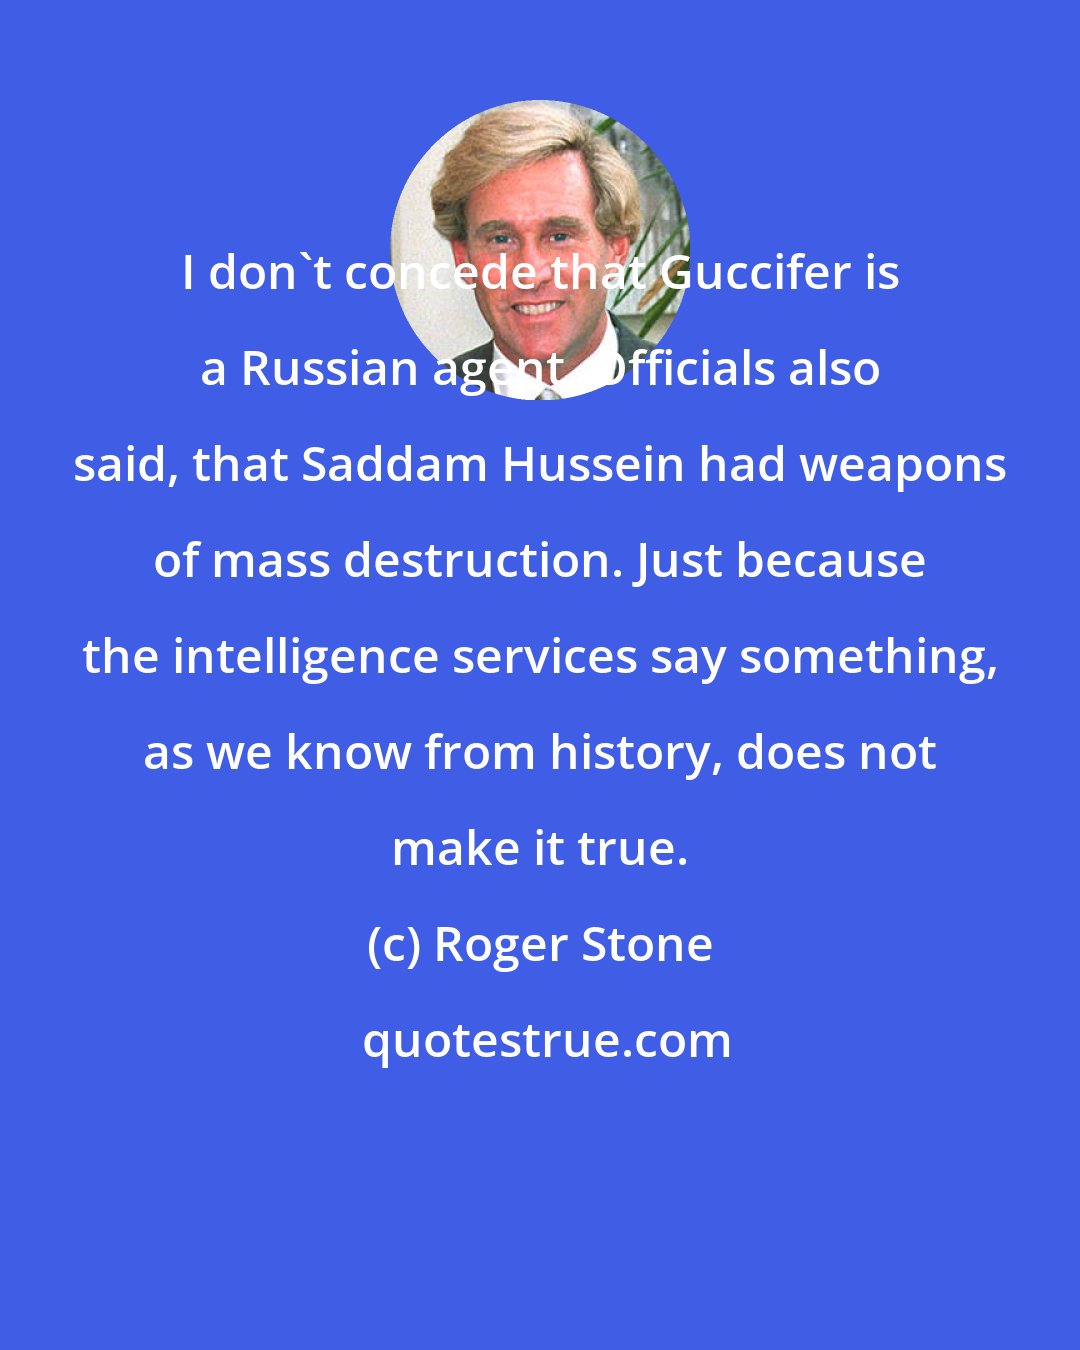 Roger Stone: I don't concede that Guccifer is a Russian agent. Officials also said, that Saddam Hussein had weapons of mass destruction. Just because the intelligence services say something, as we know from history, does not make it true.